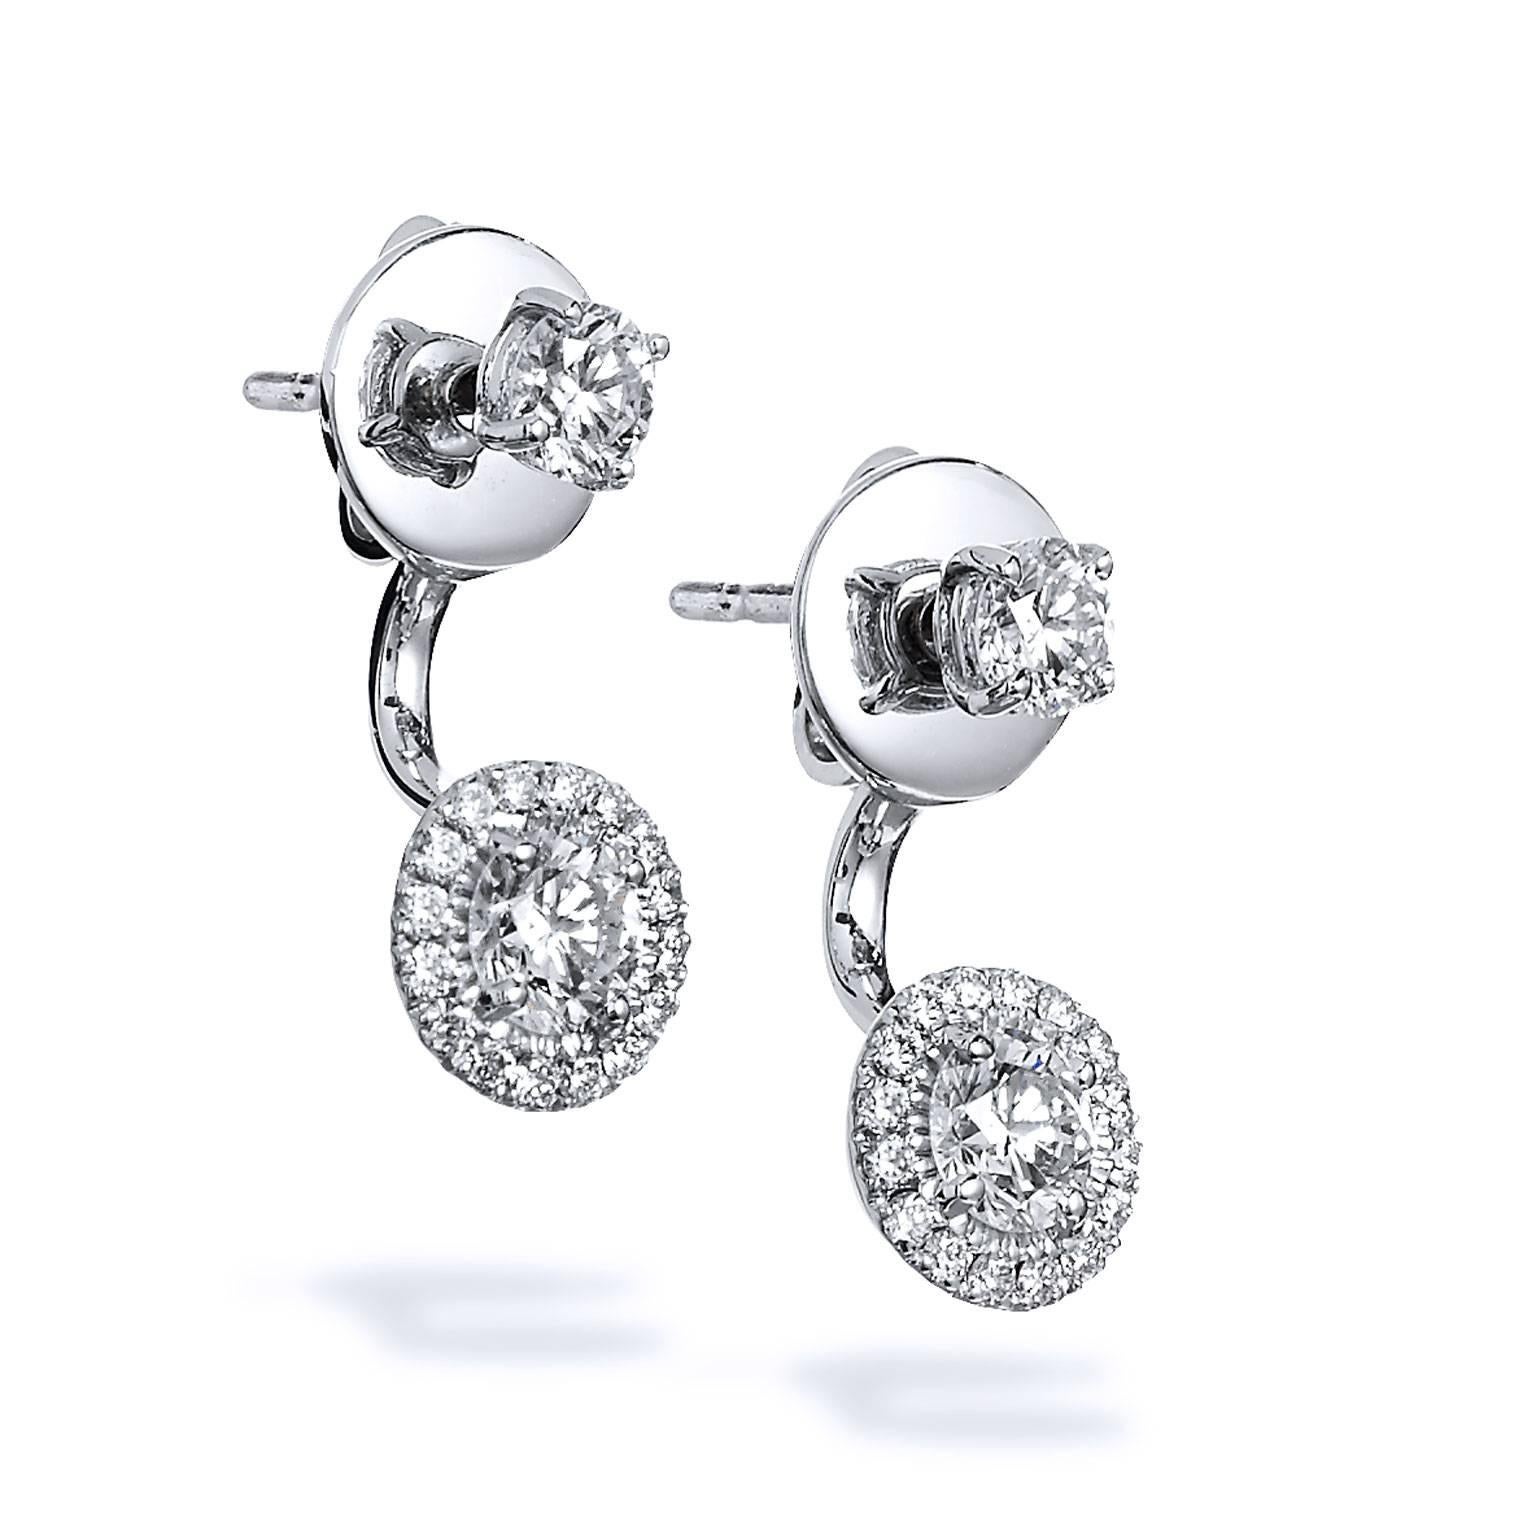 18 karat white gold double-sided stud earrings featuring 1.14 carat of round diamond (G/SI1).